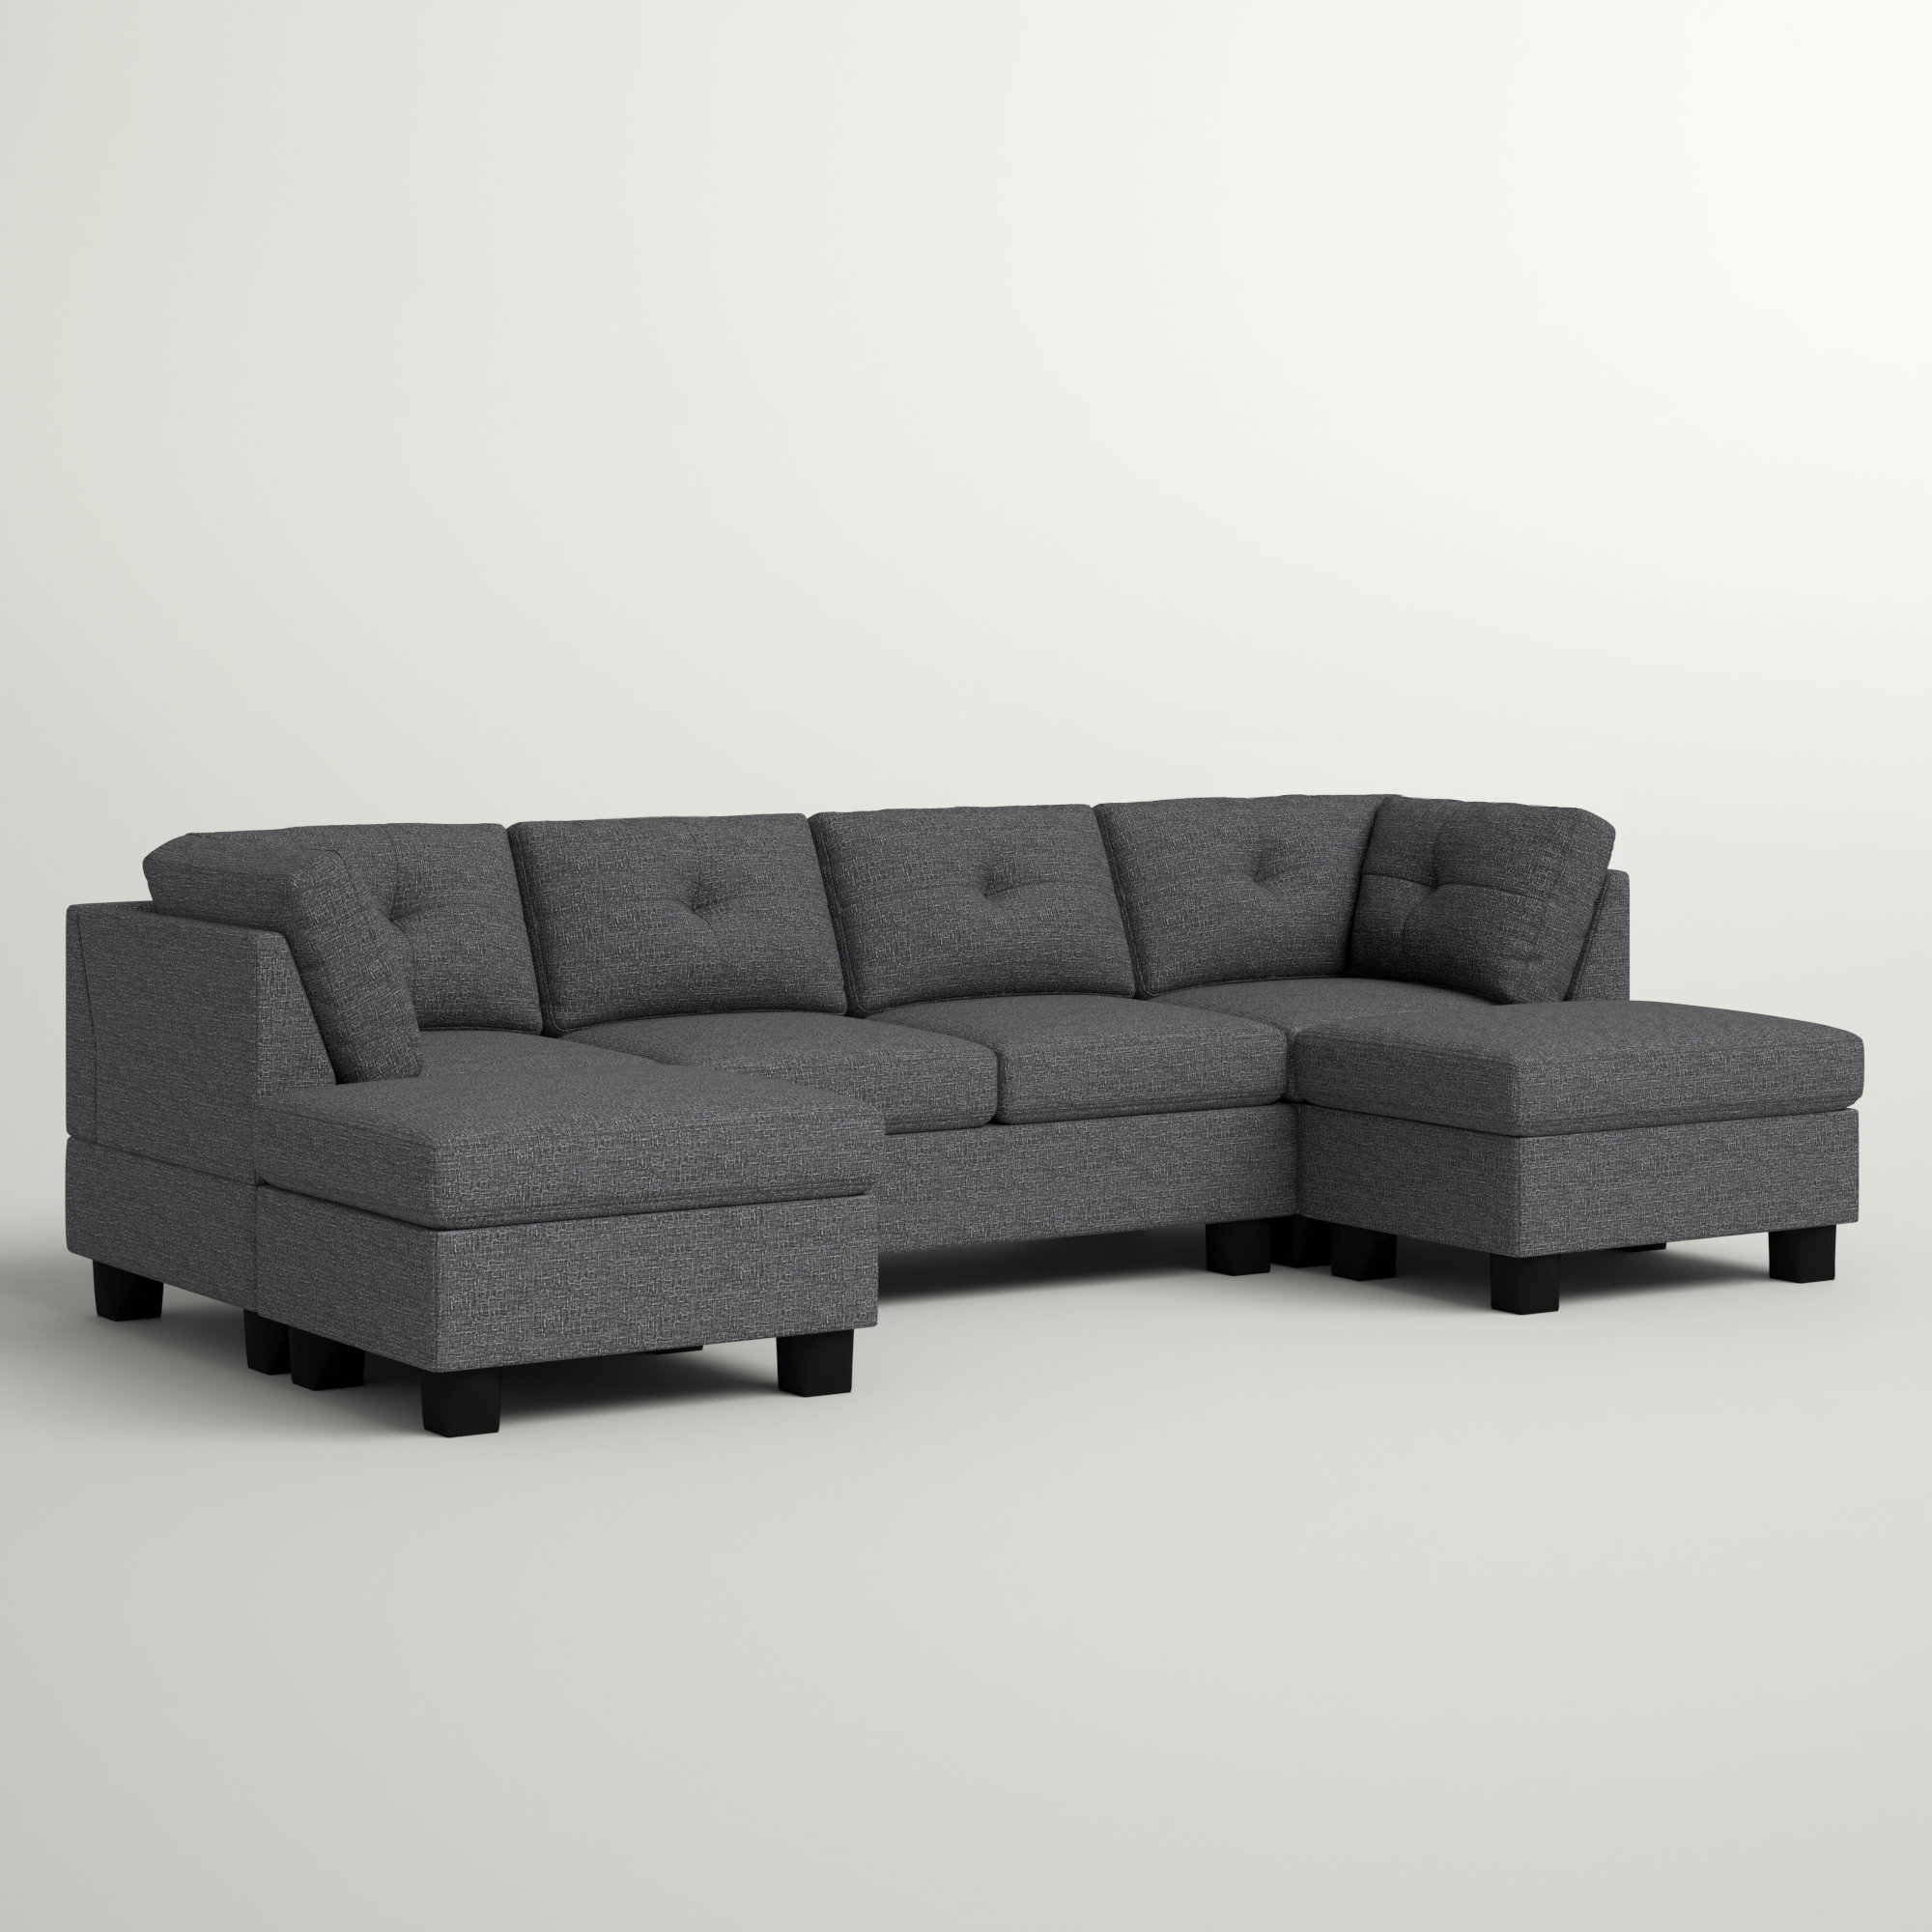 Ashwell 118″ Wide Reversible Modular Sofa & Chaise with Ottoman